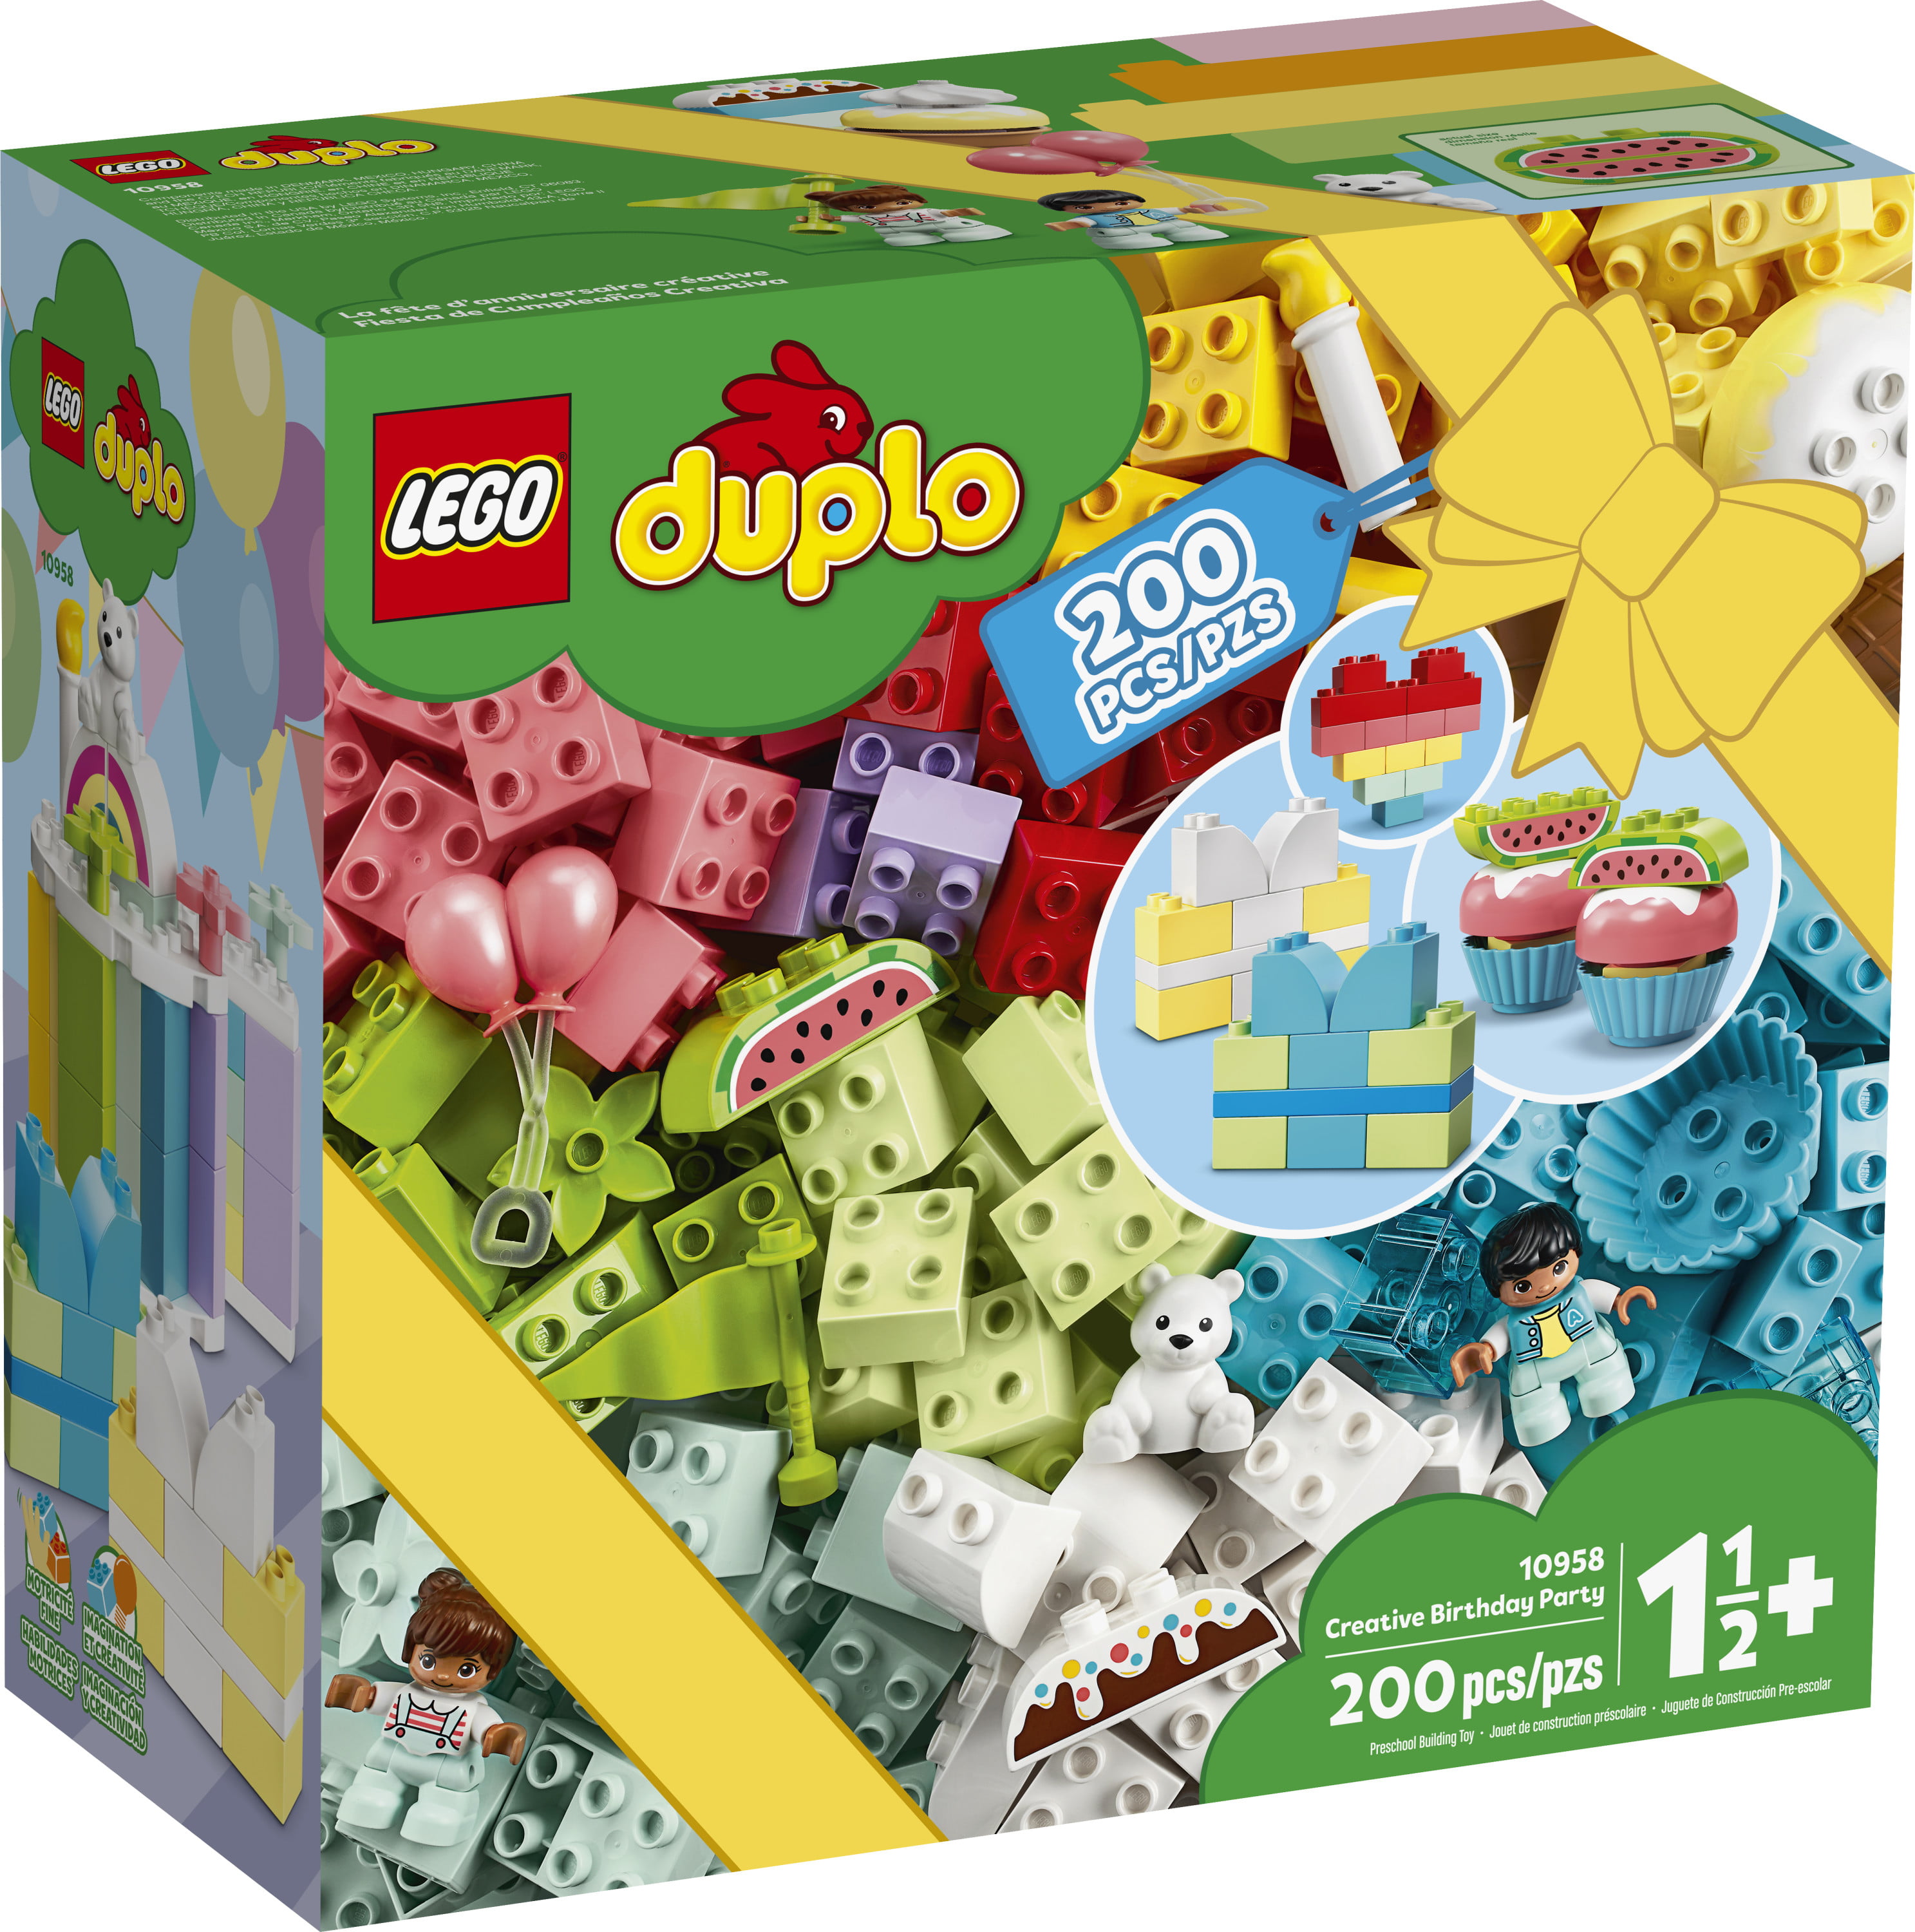 LEGO DUPLO Classic Creative Birthday Party 10958 Building Fun for Toddlers Pieces) - Walmart.com